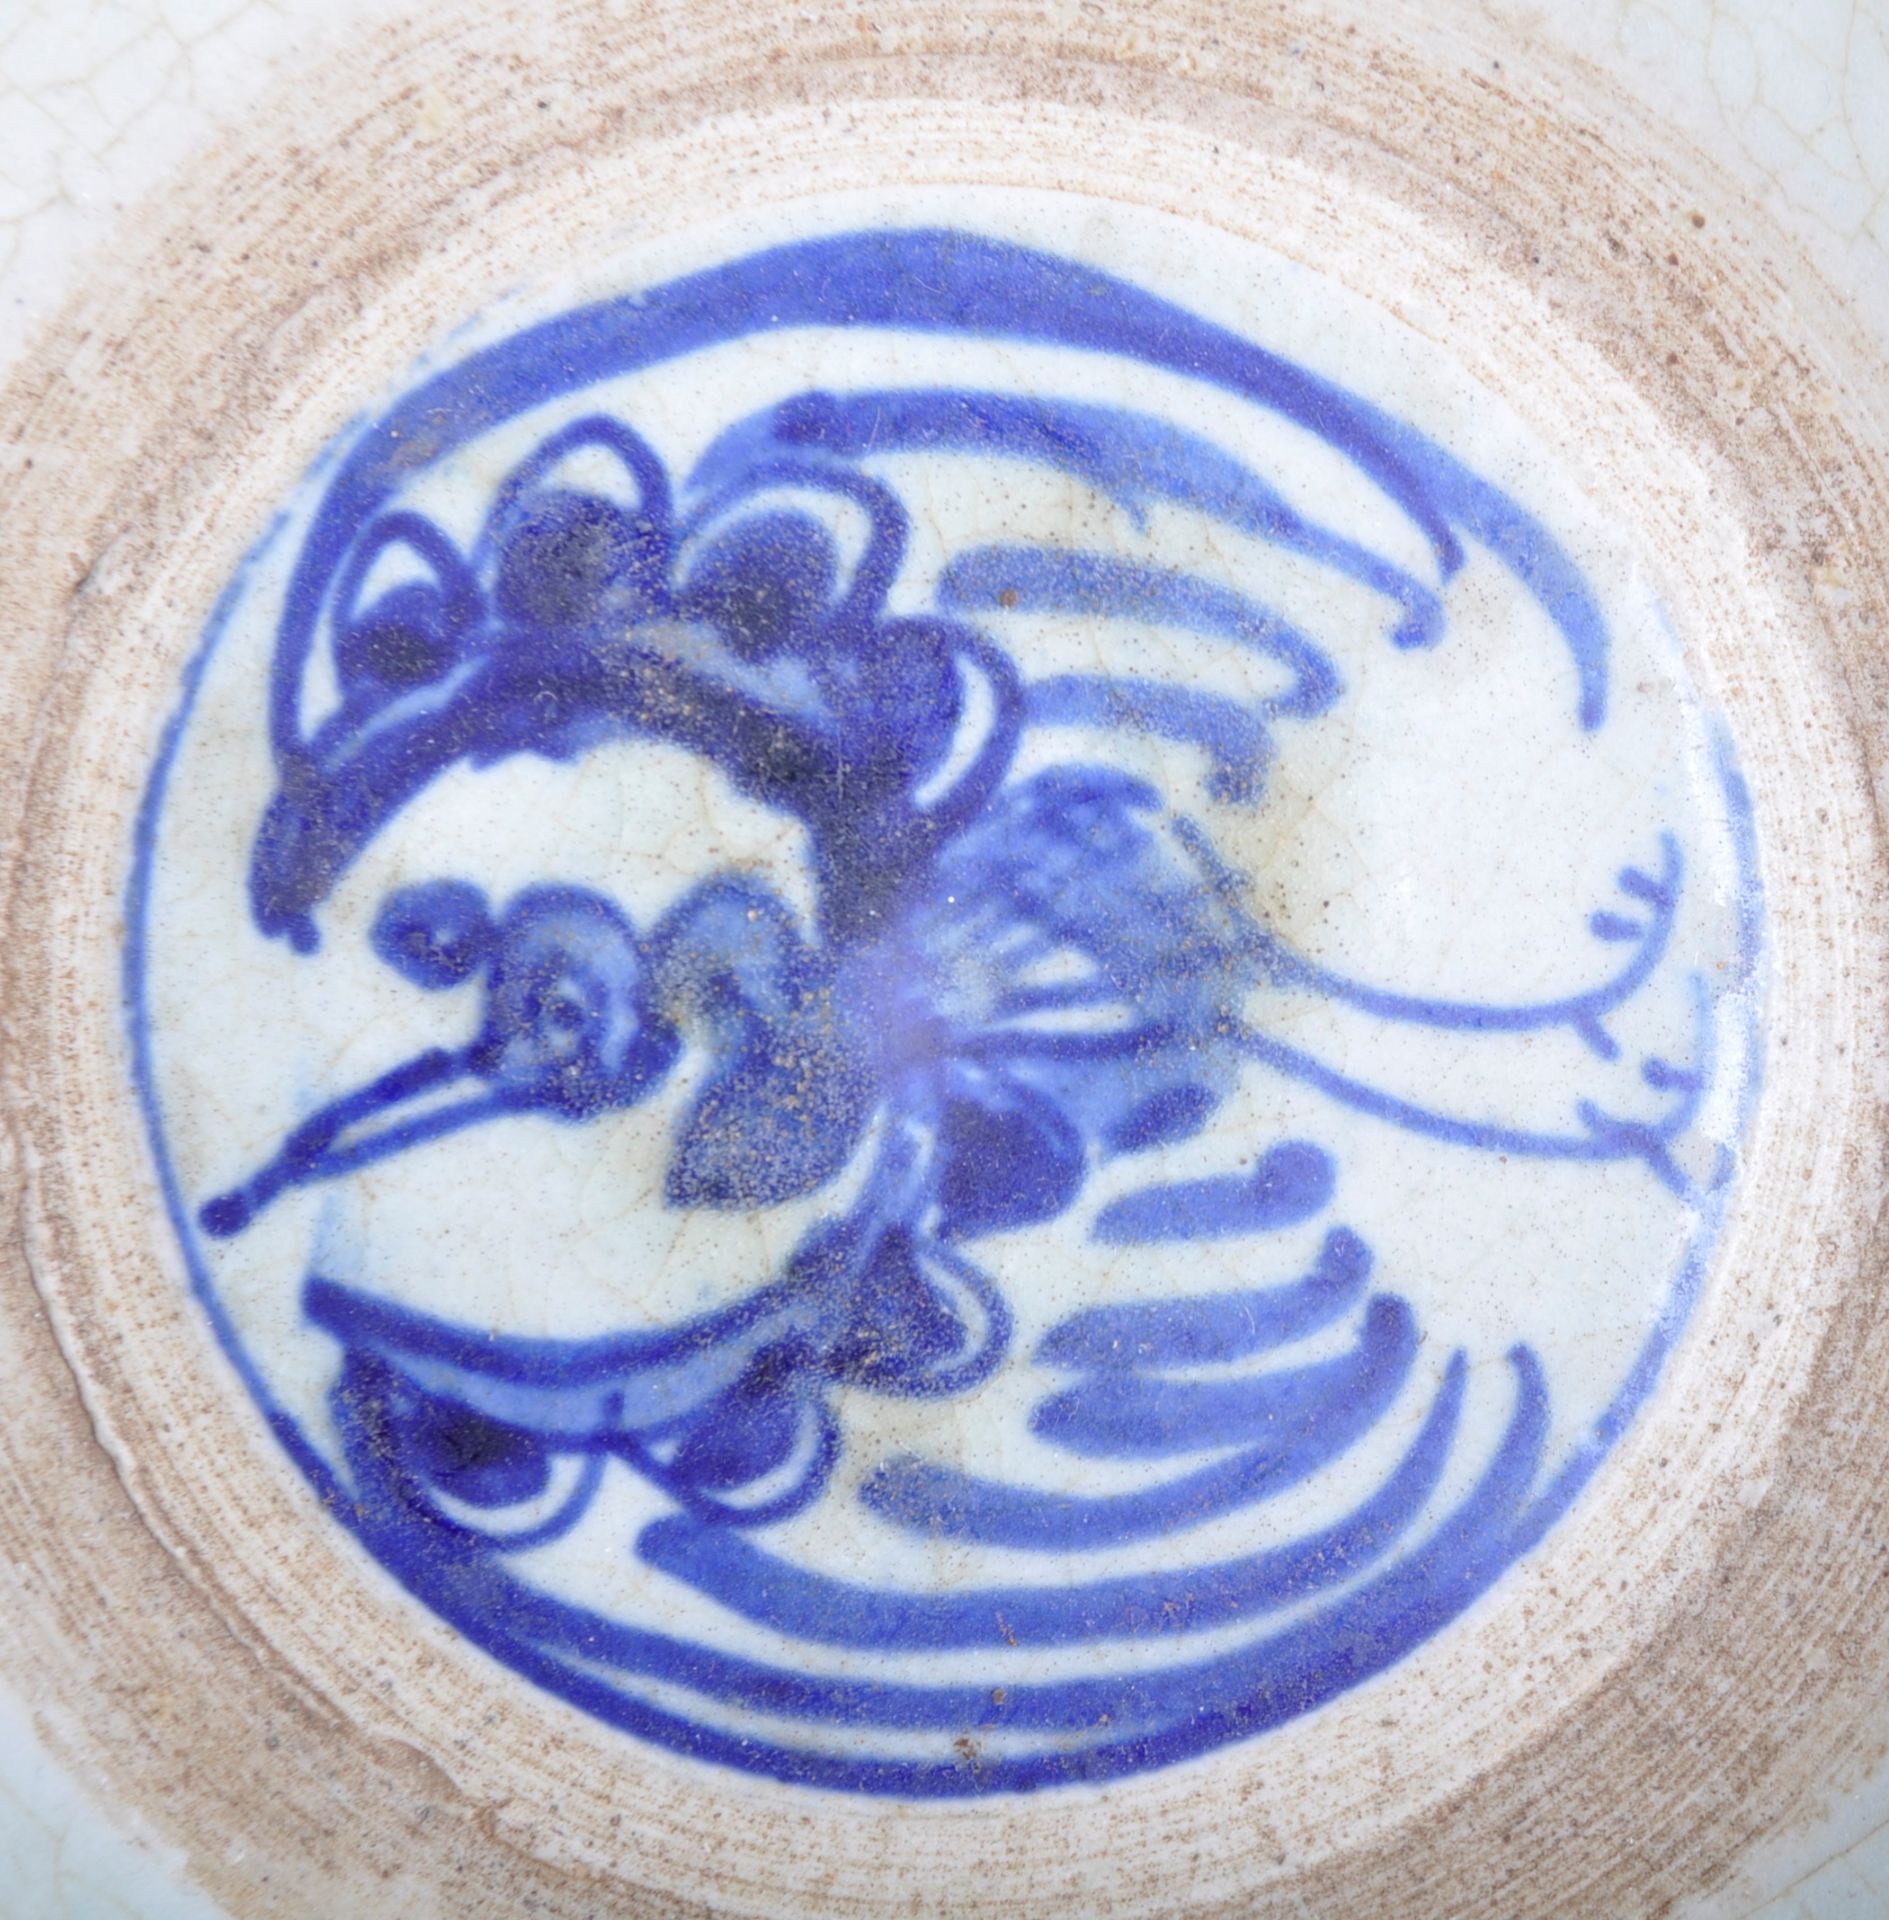 19TH CENTURY CHINESE ORIENTALPROVINCIAL CRACK WARE BOWL - Image 4 of 7